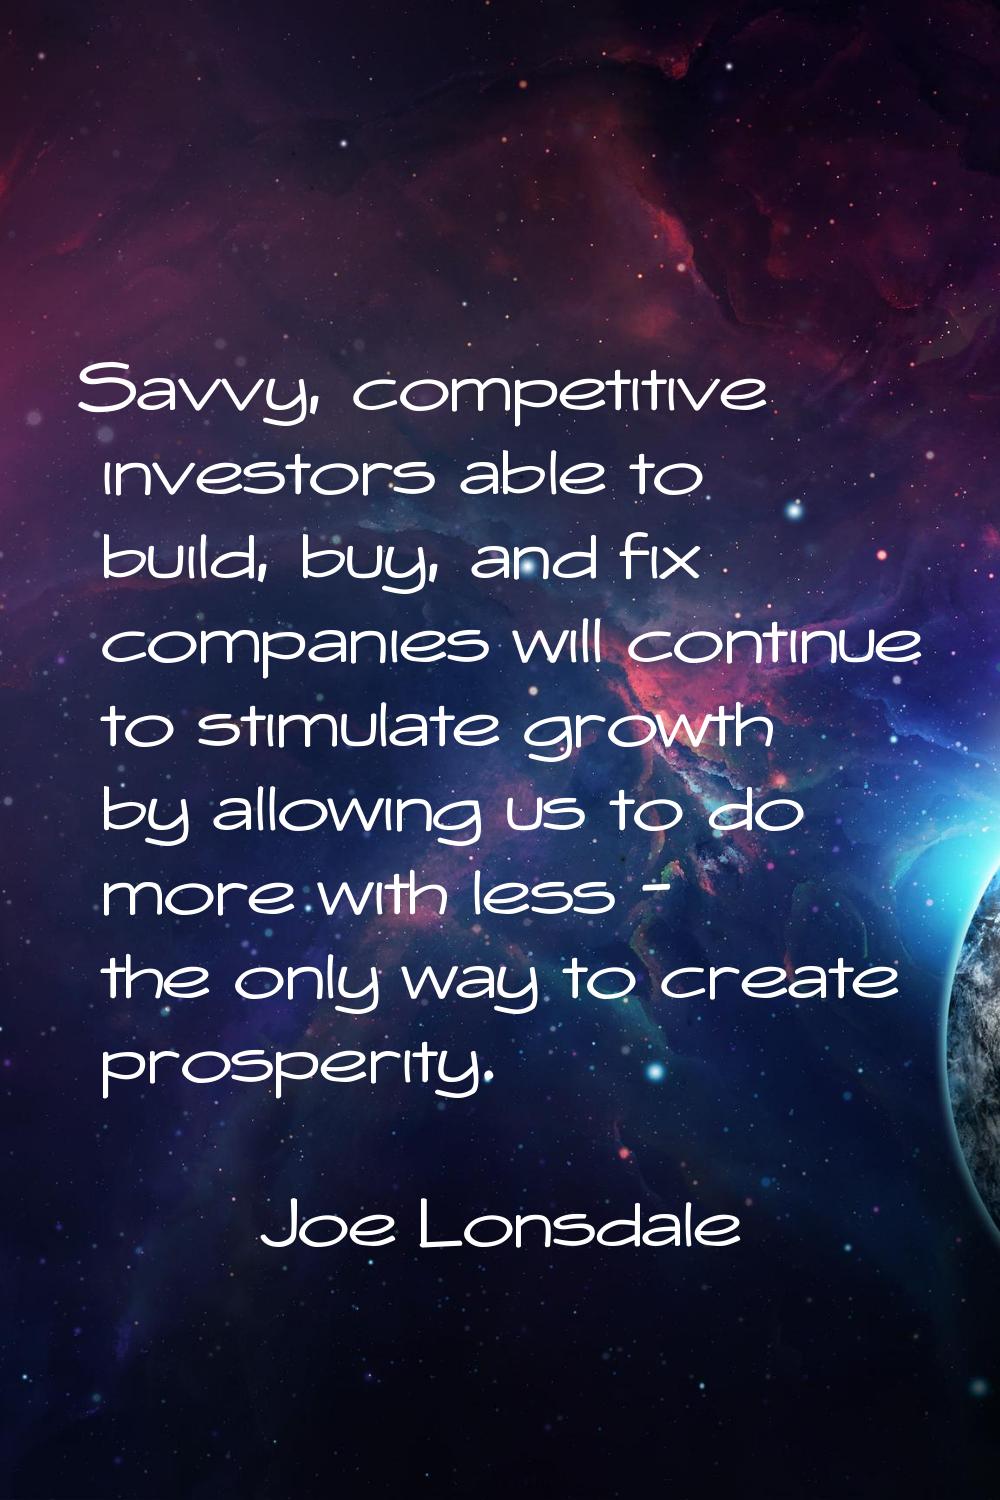 Savvy, competitive investors able to build, buy, and fix companies will continue to stimulate growt